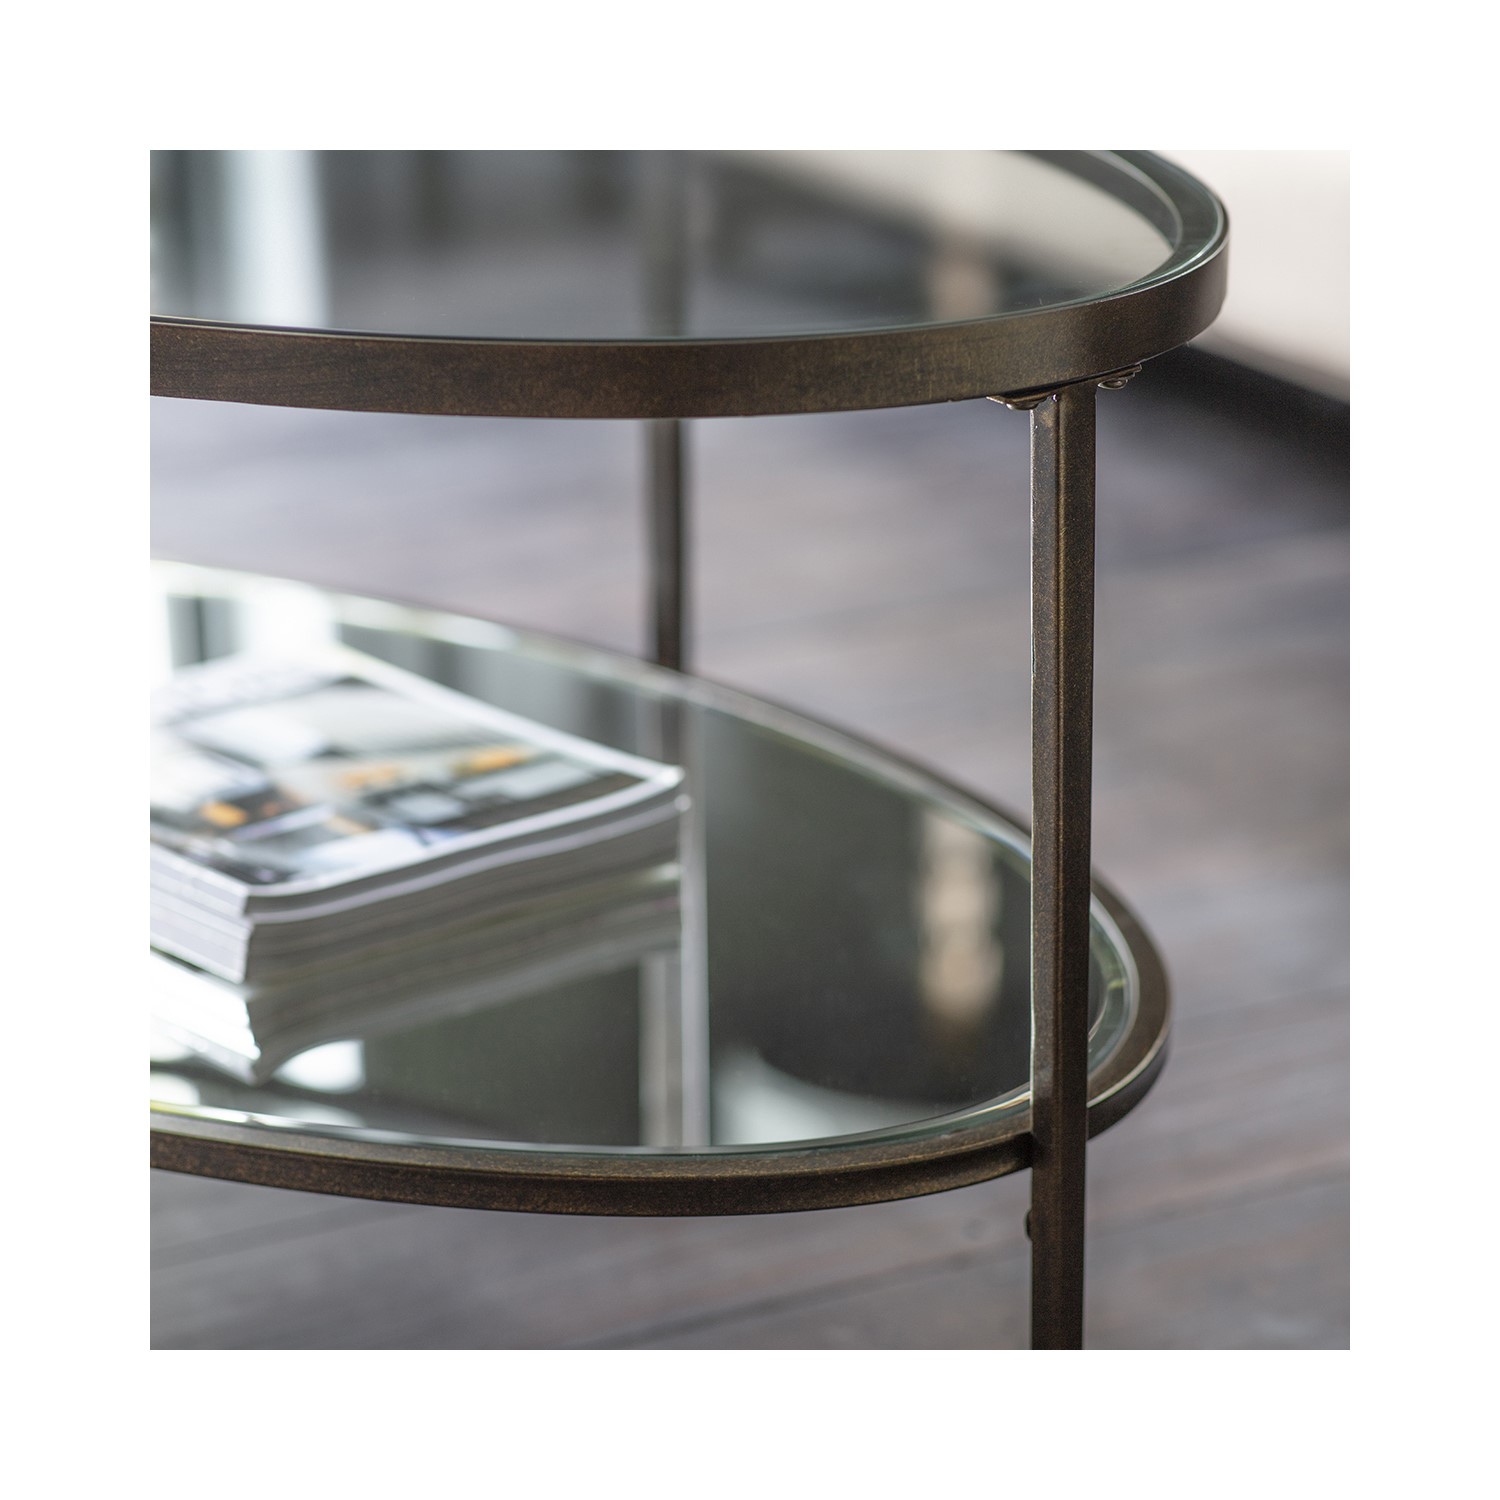 Read more about Hudson glass coffee table in bronze caspian house